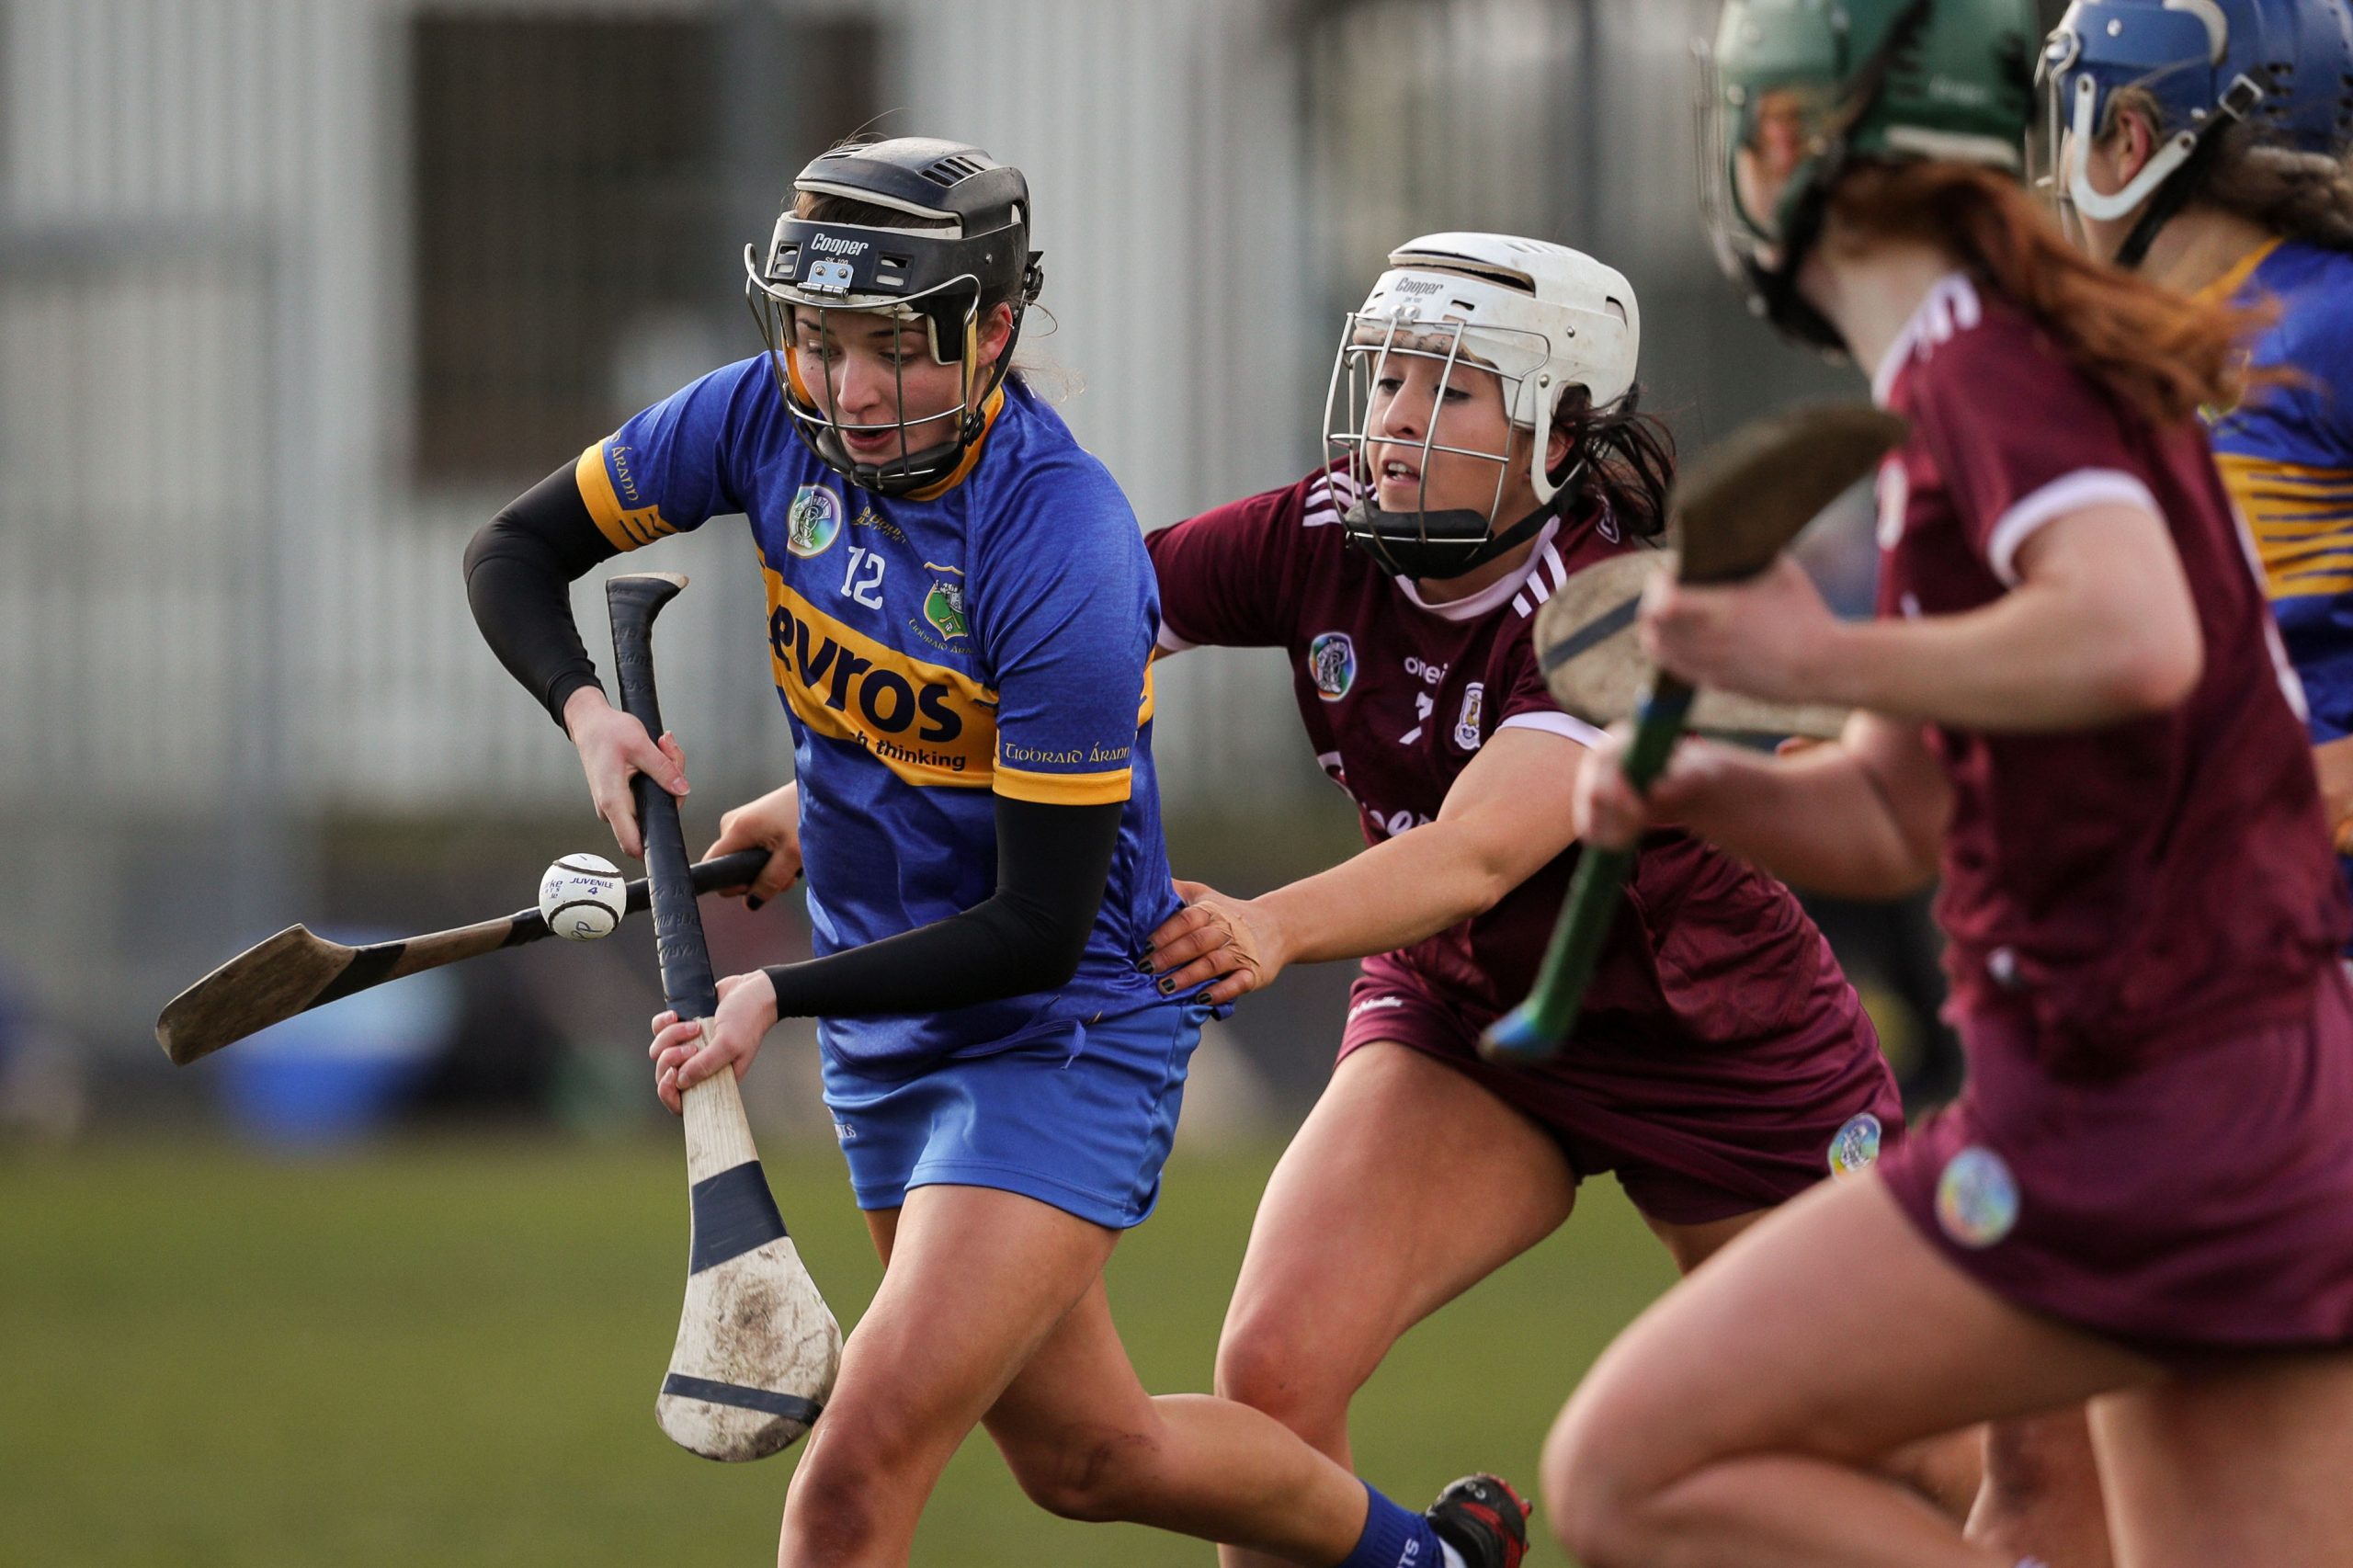 ROUND-UP: Tipp top Galway to book Final spot